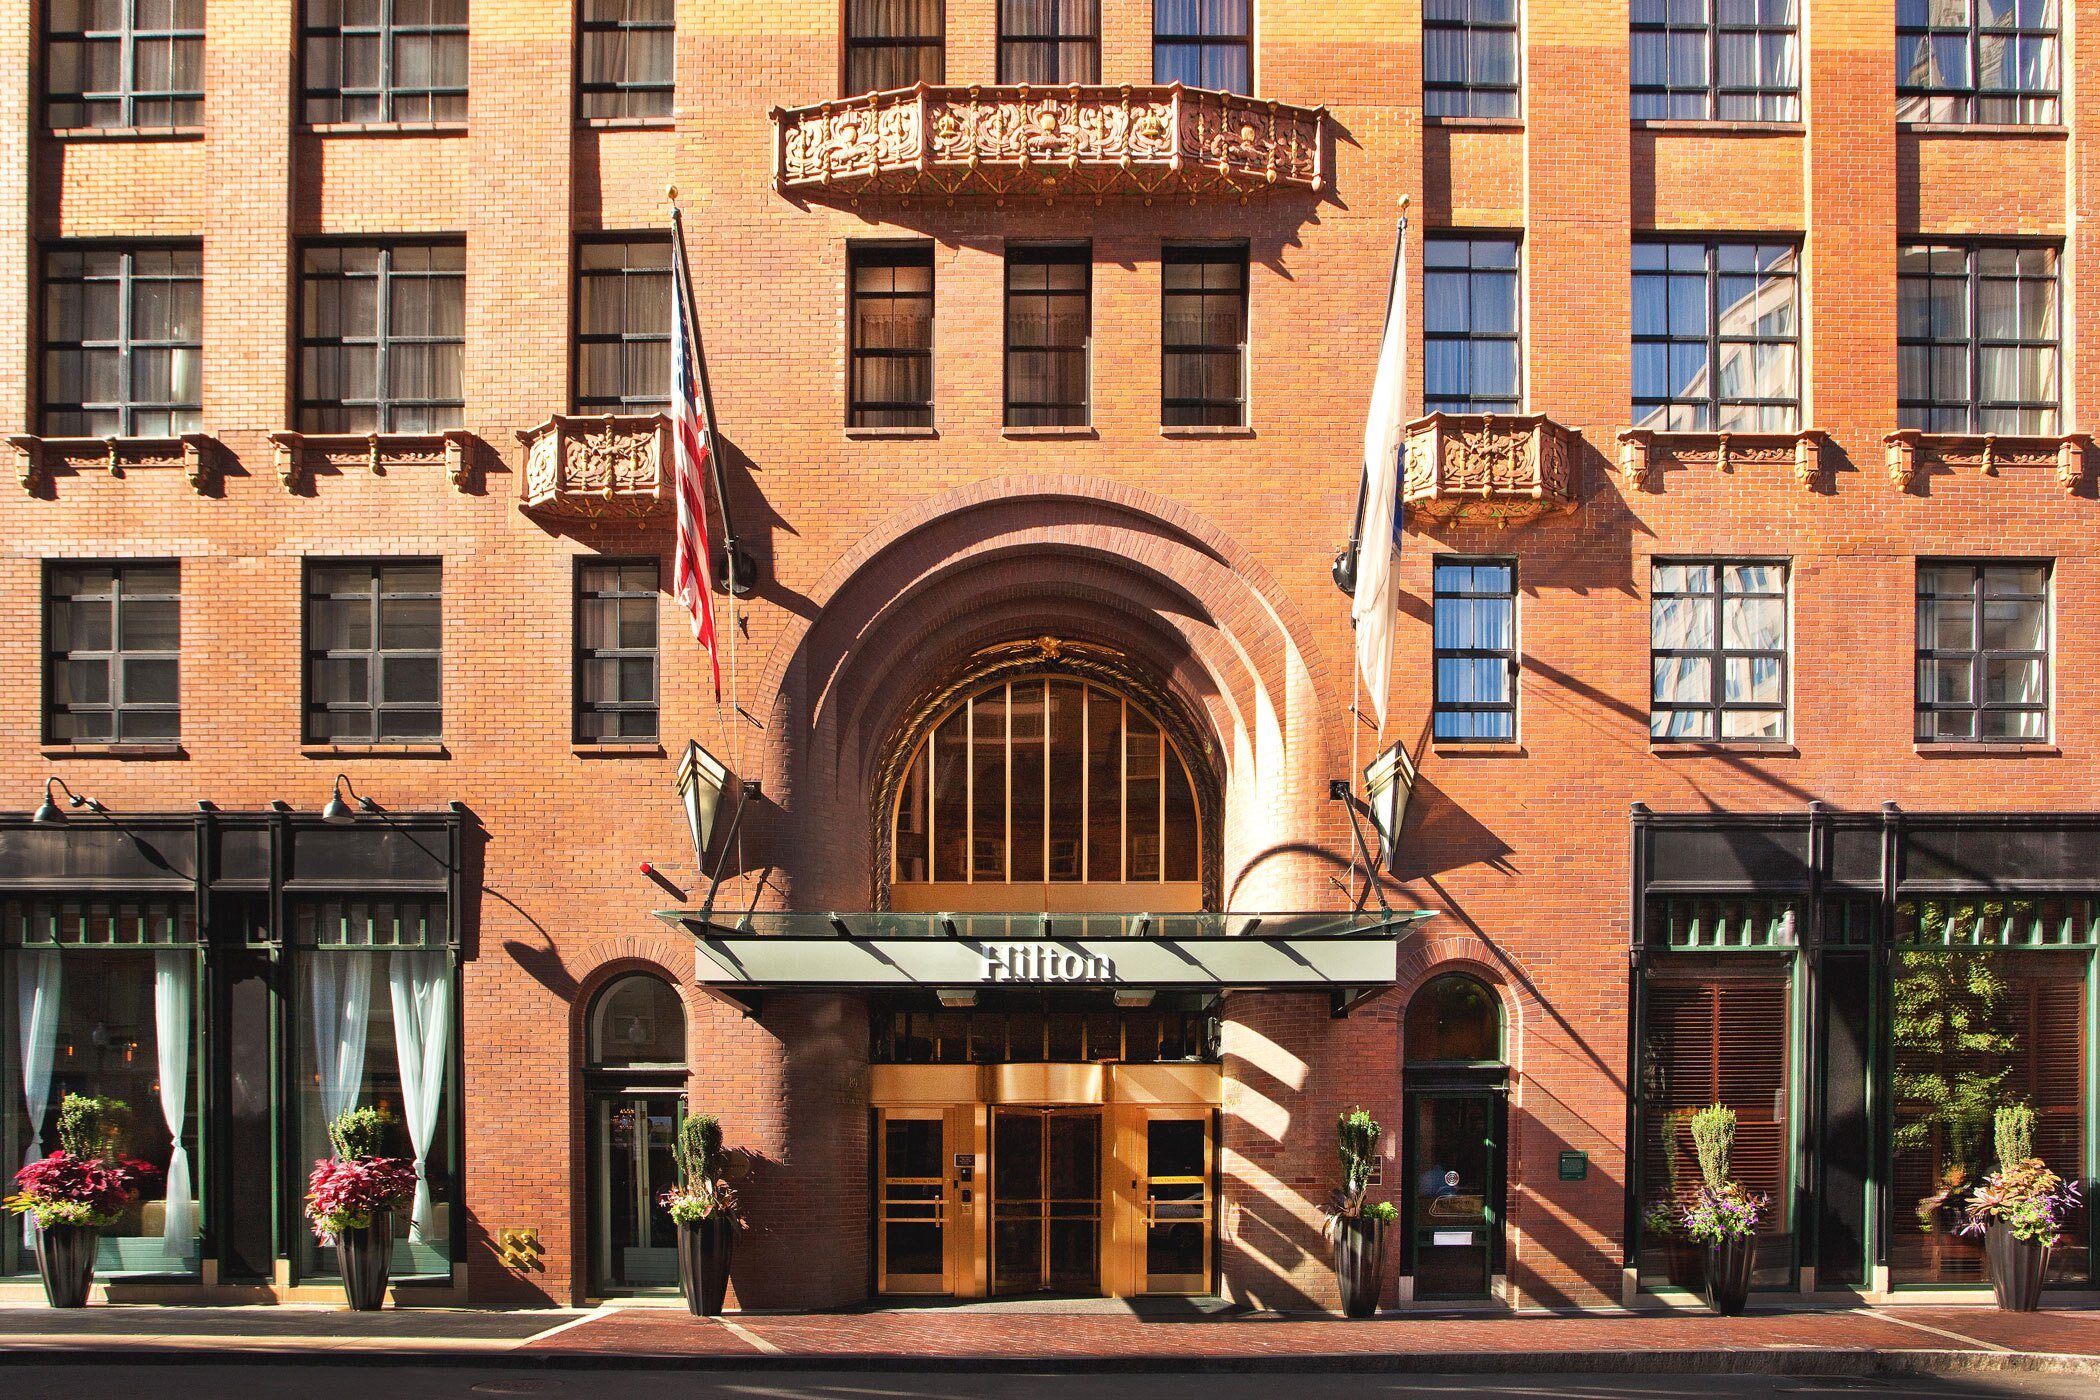 DiamondRock Hospitality Company is in the midst of a major renovation of the 403-room, upper-upscale Hilton Boston Faneuil Hall. Executives said they're considering taking the property independent once the renovations wrap up in the middle of this year. (Hilton)